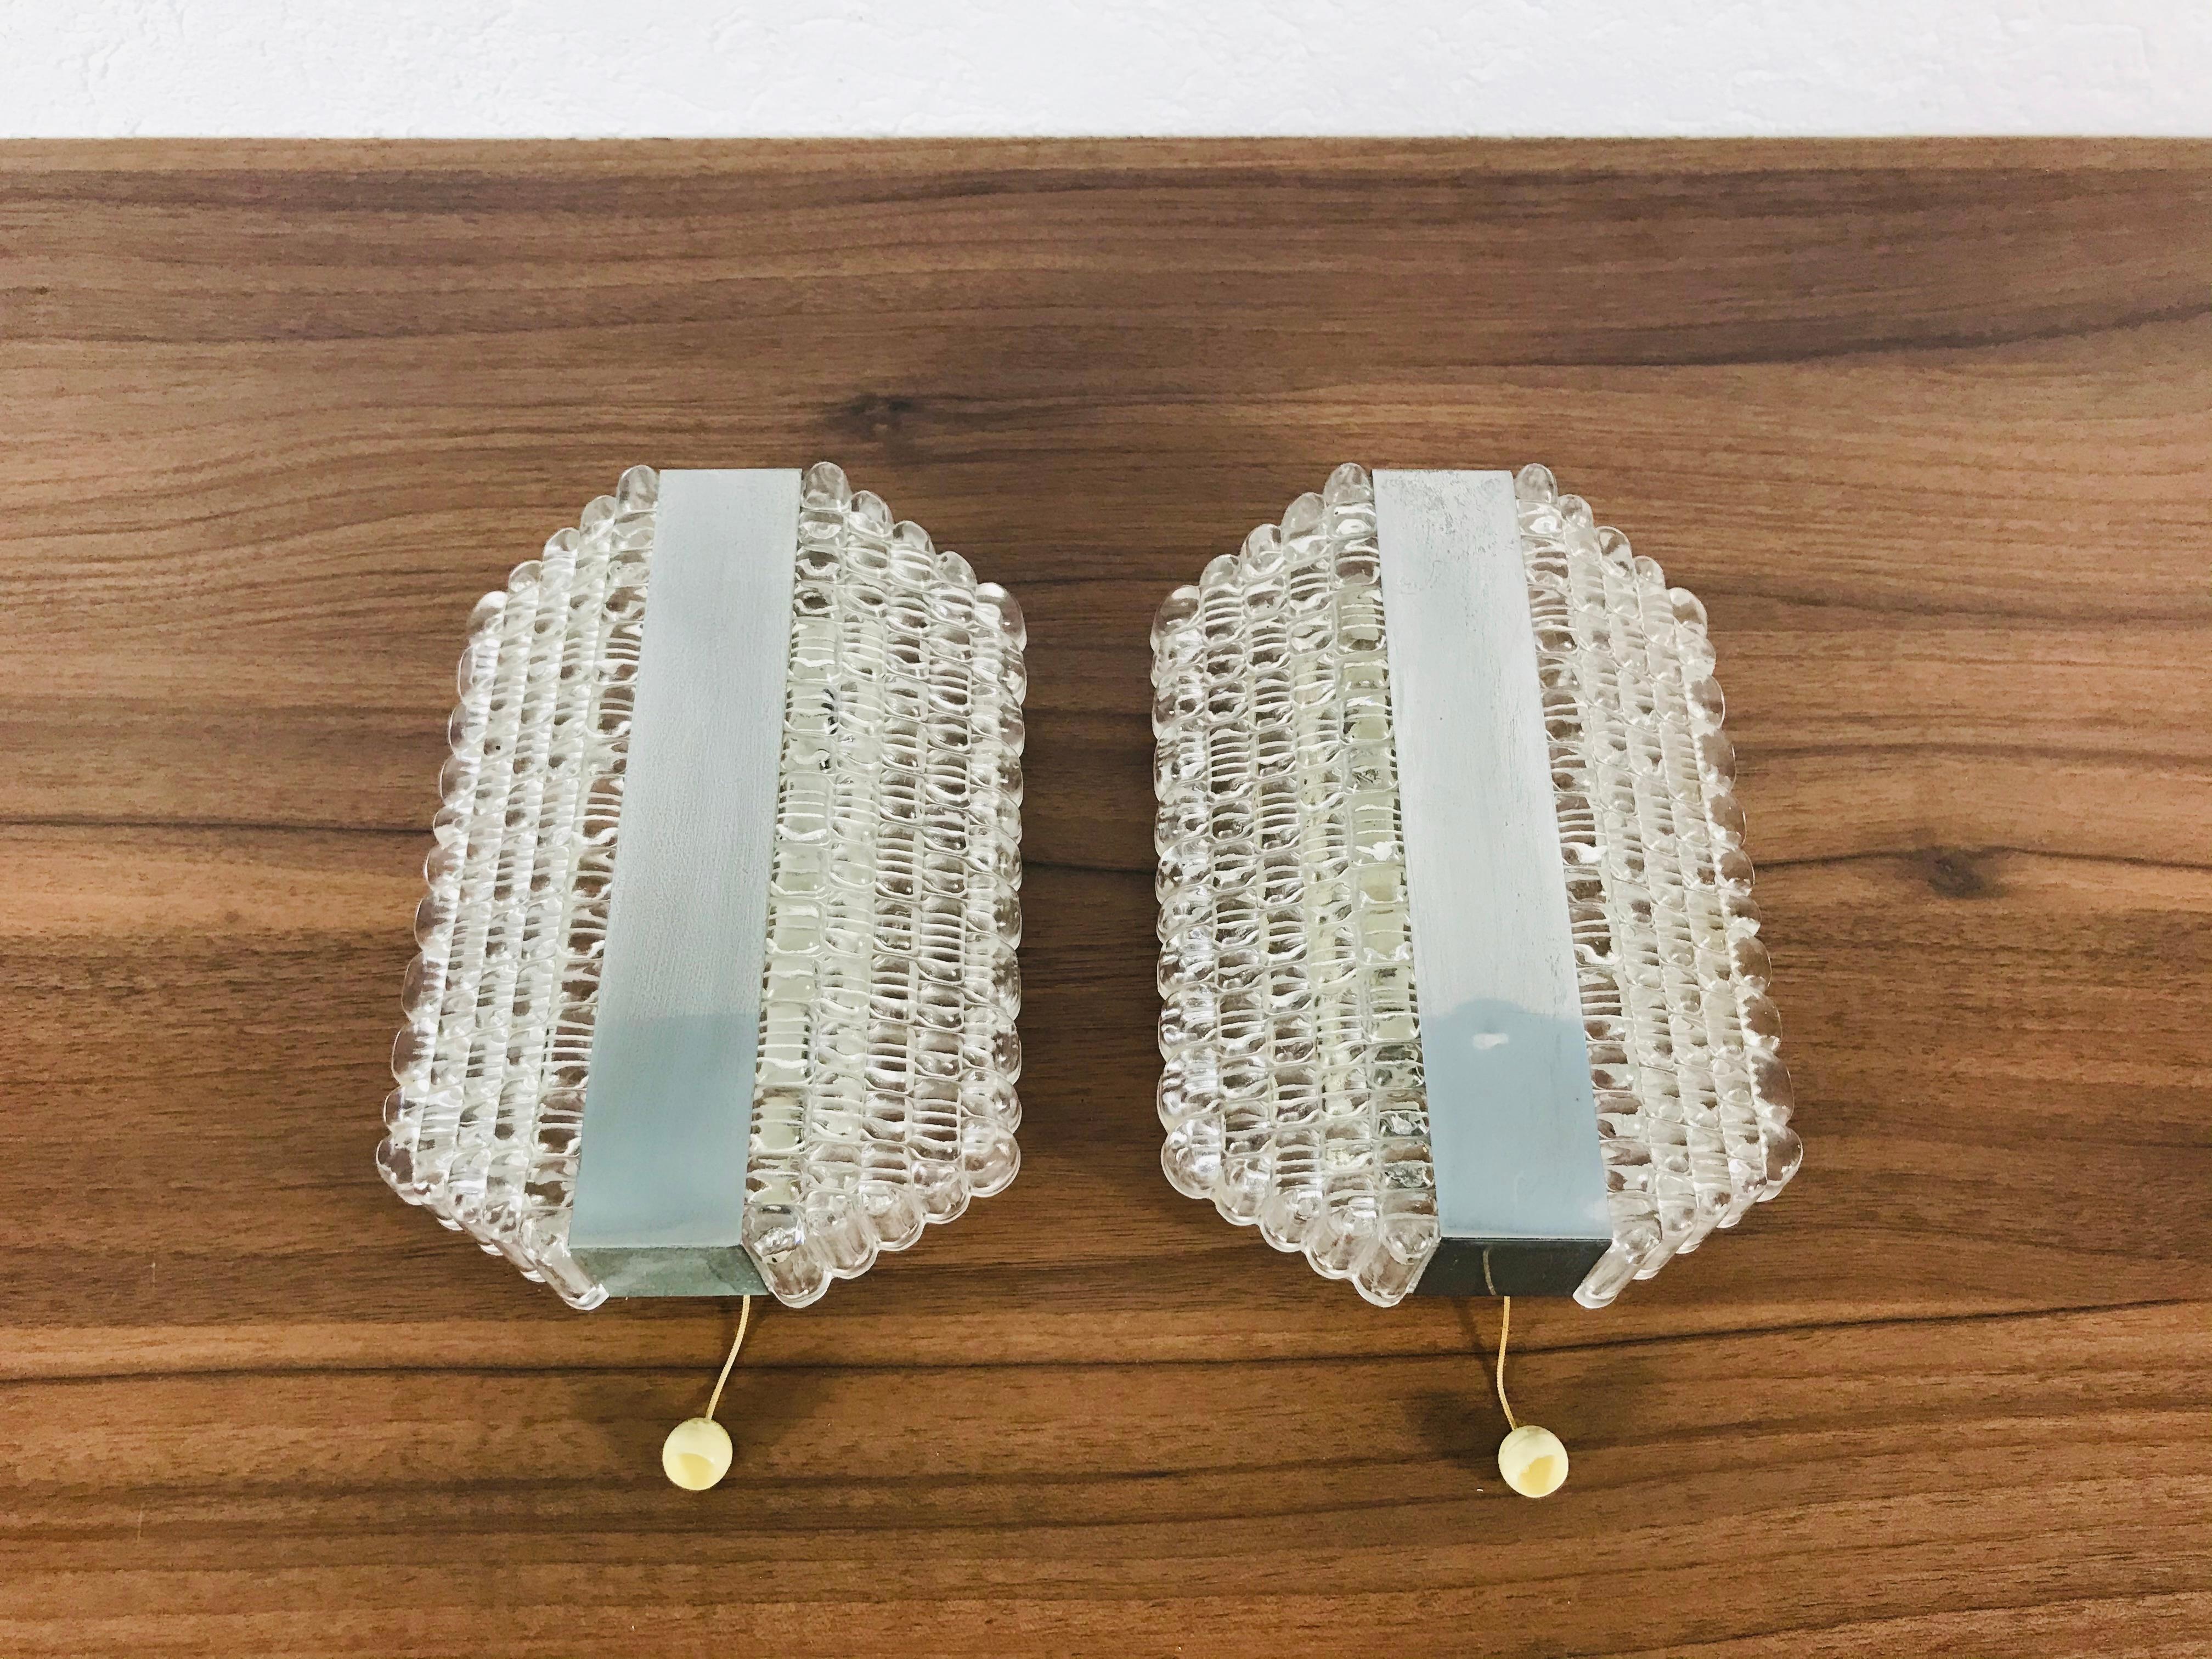 Set of 3 Metal and Glass Kaiser Midcentury Wall Lamps, 1960s, Germany For Sale 4